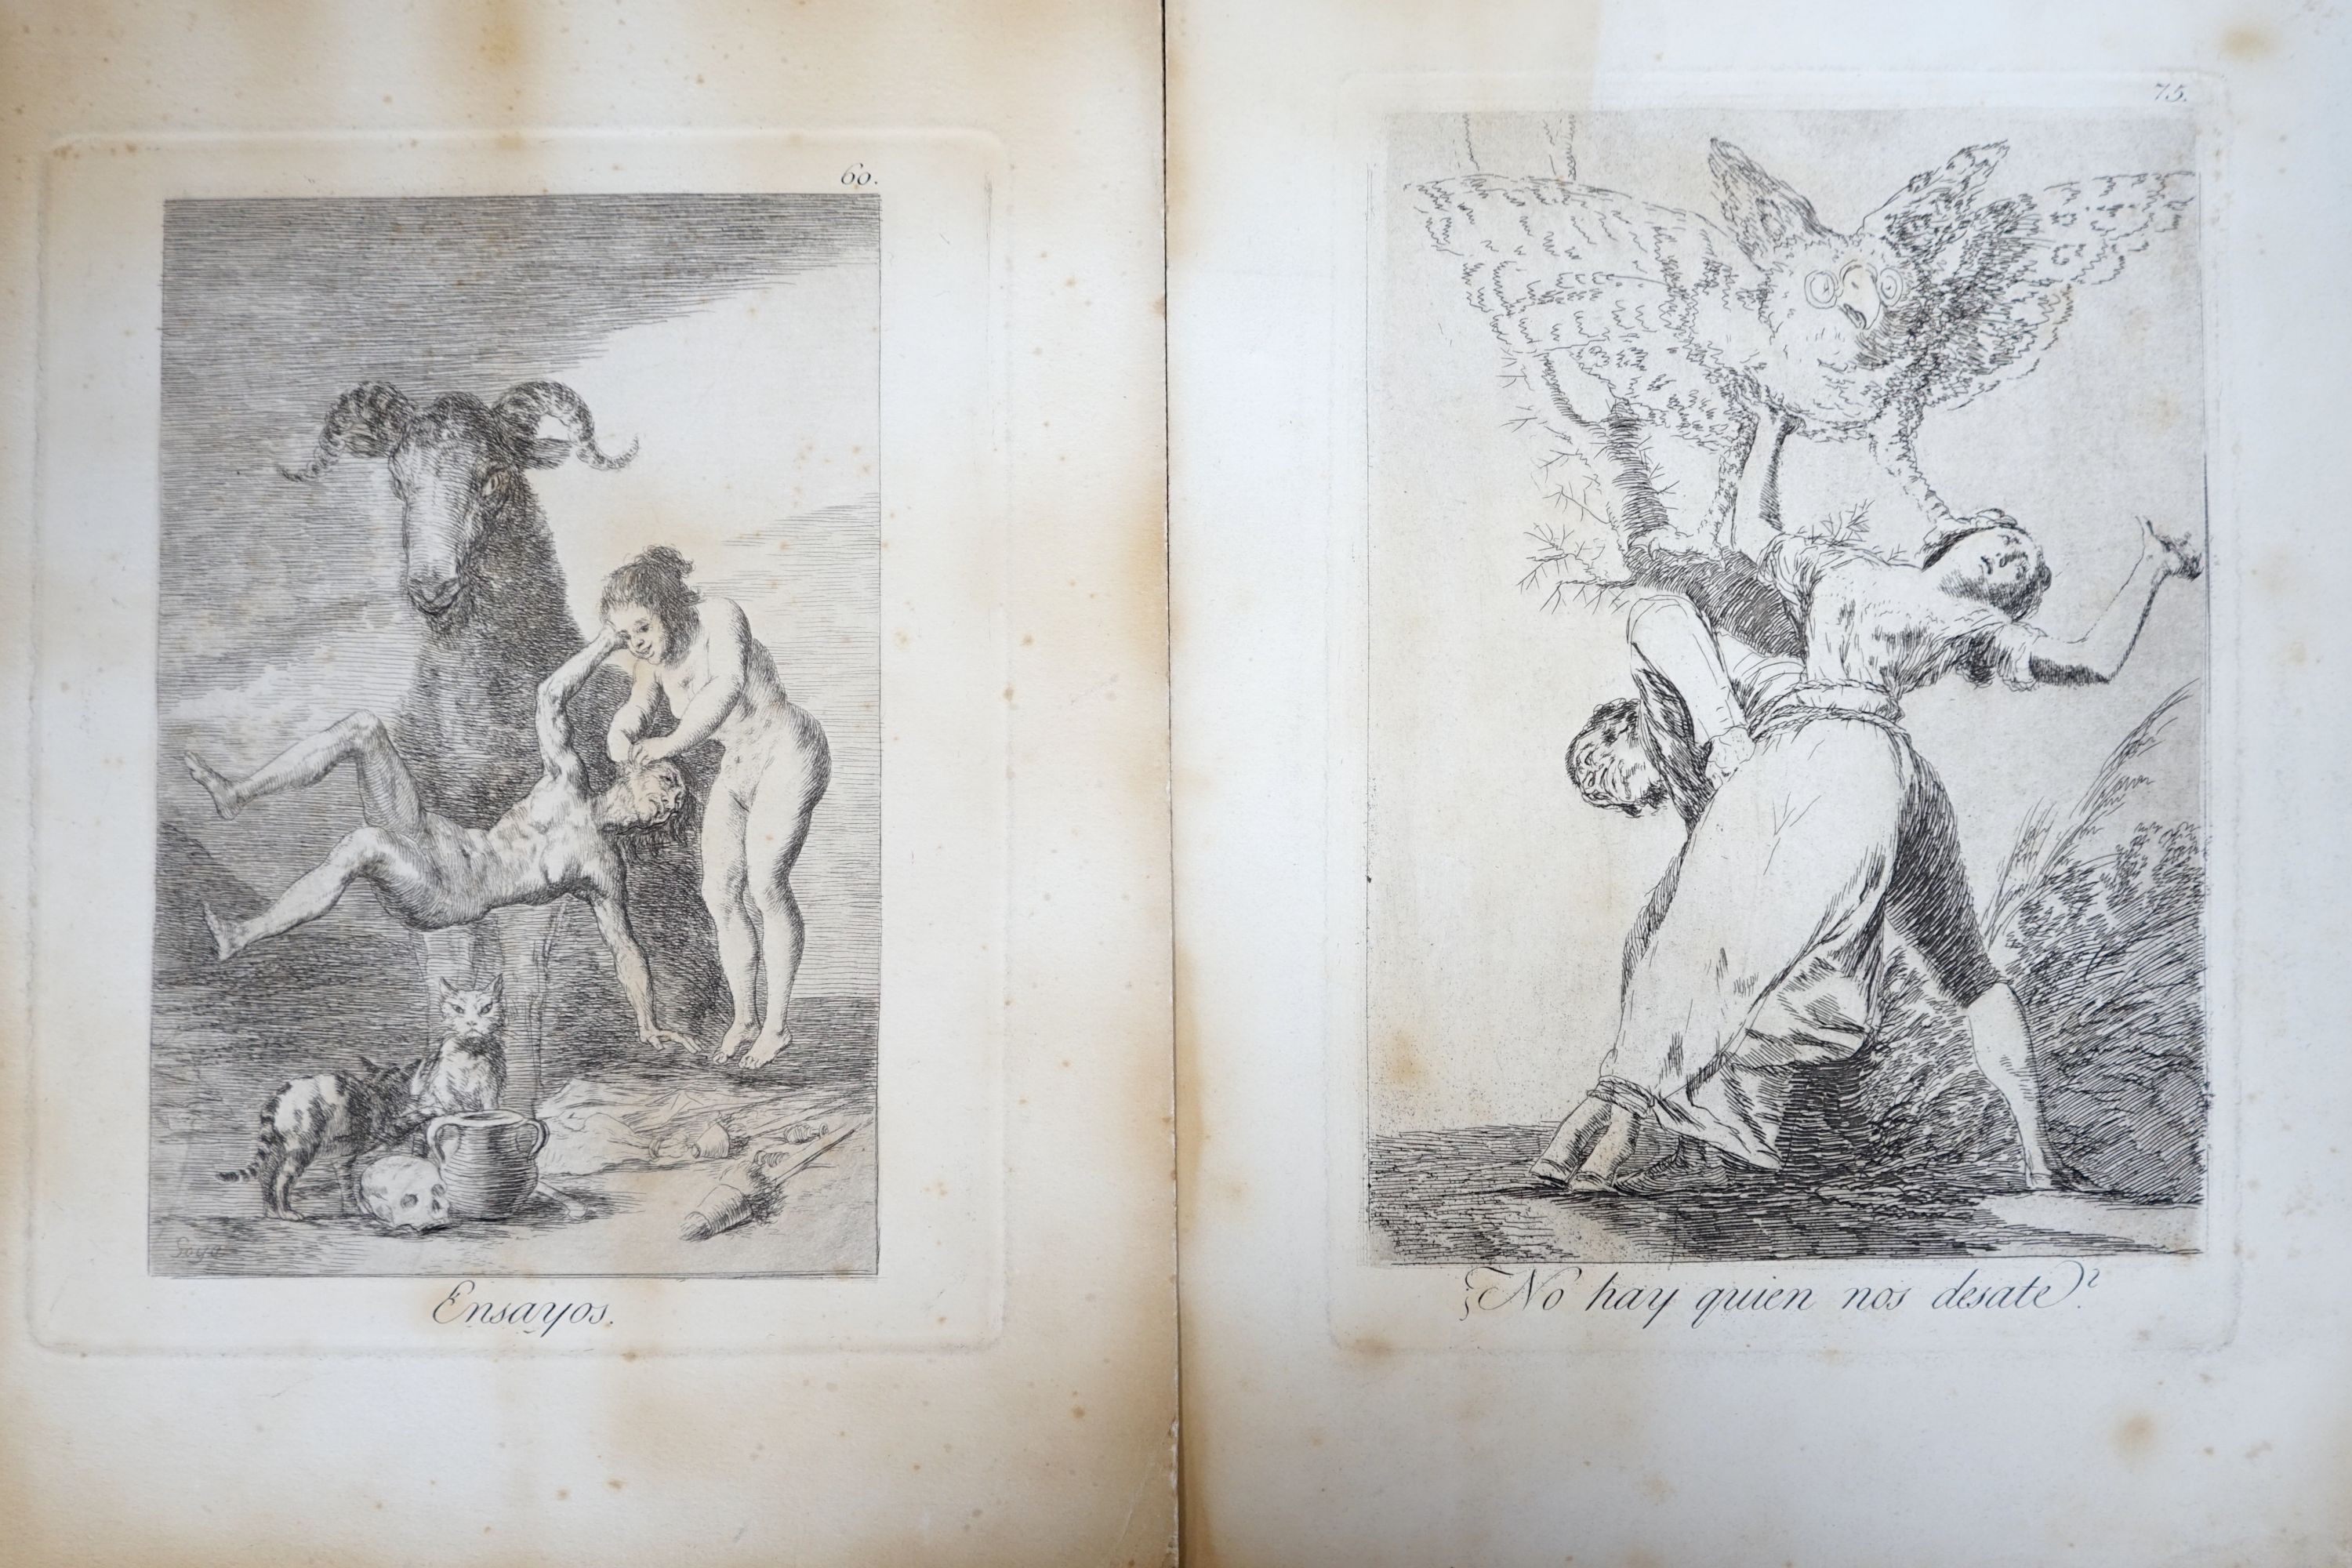 After Goya, two engravings, 'Ensayos' and 'No Hay Quien Nos Desate', numbered 60 and 75, overall 29 x 21cm, unframed